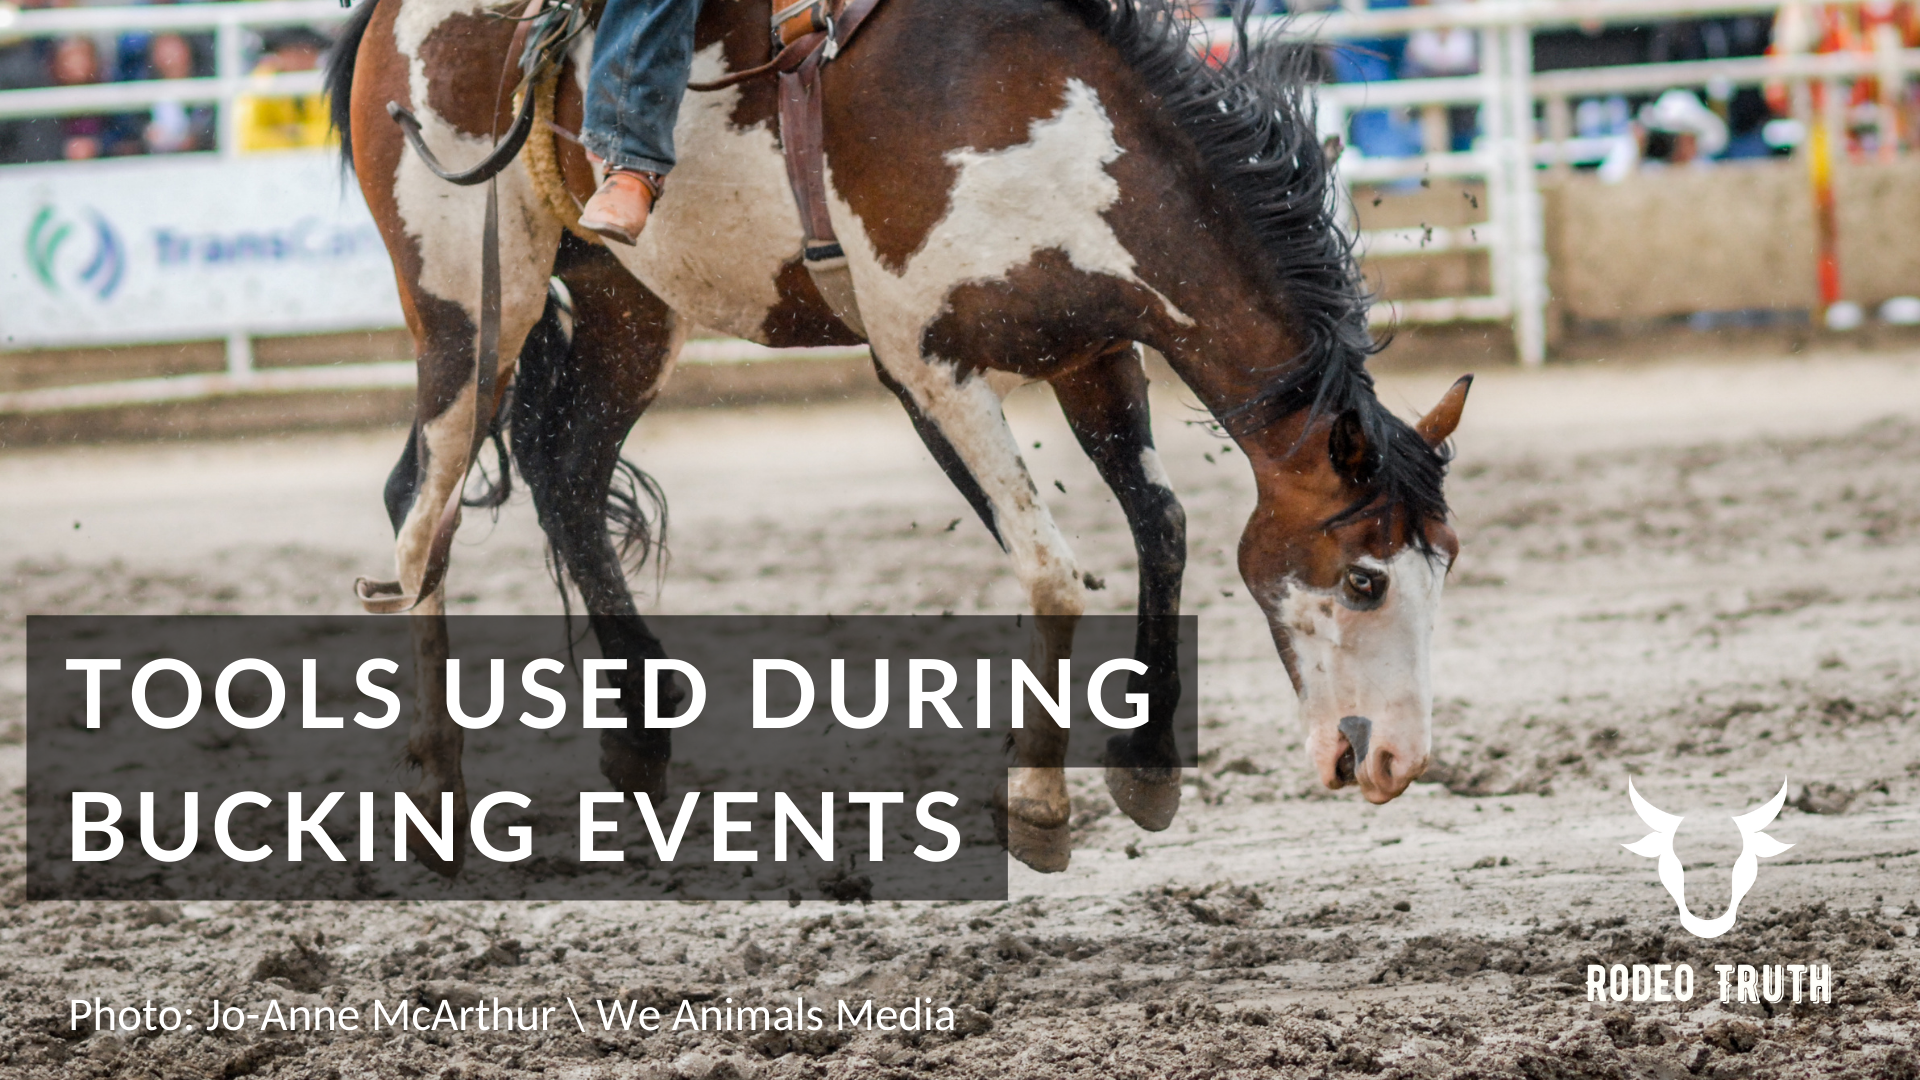 The Truth About Rodeo - Rodeo Events at the Calgary Stampede